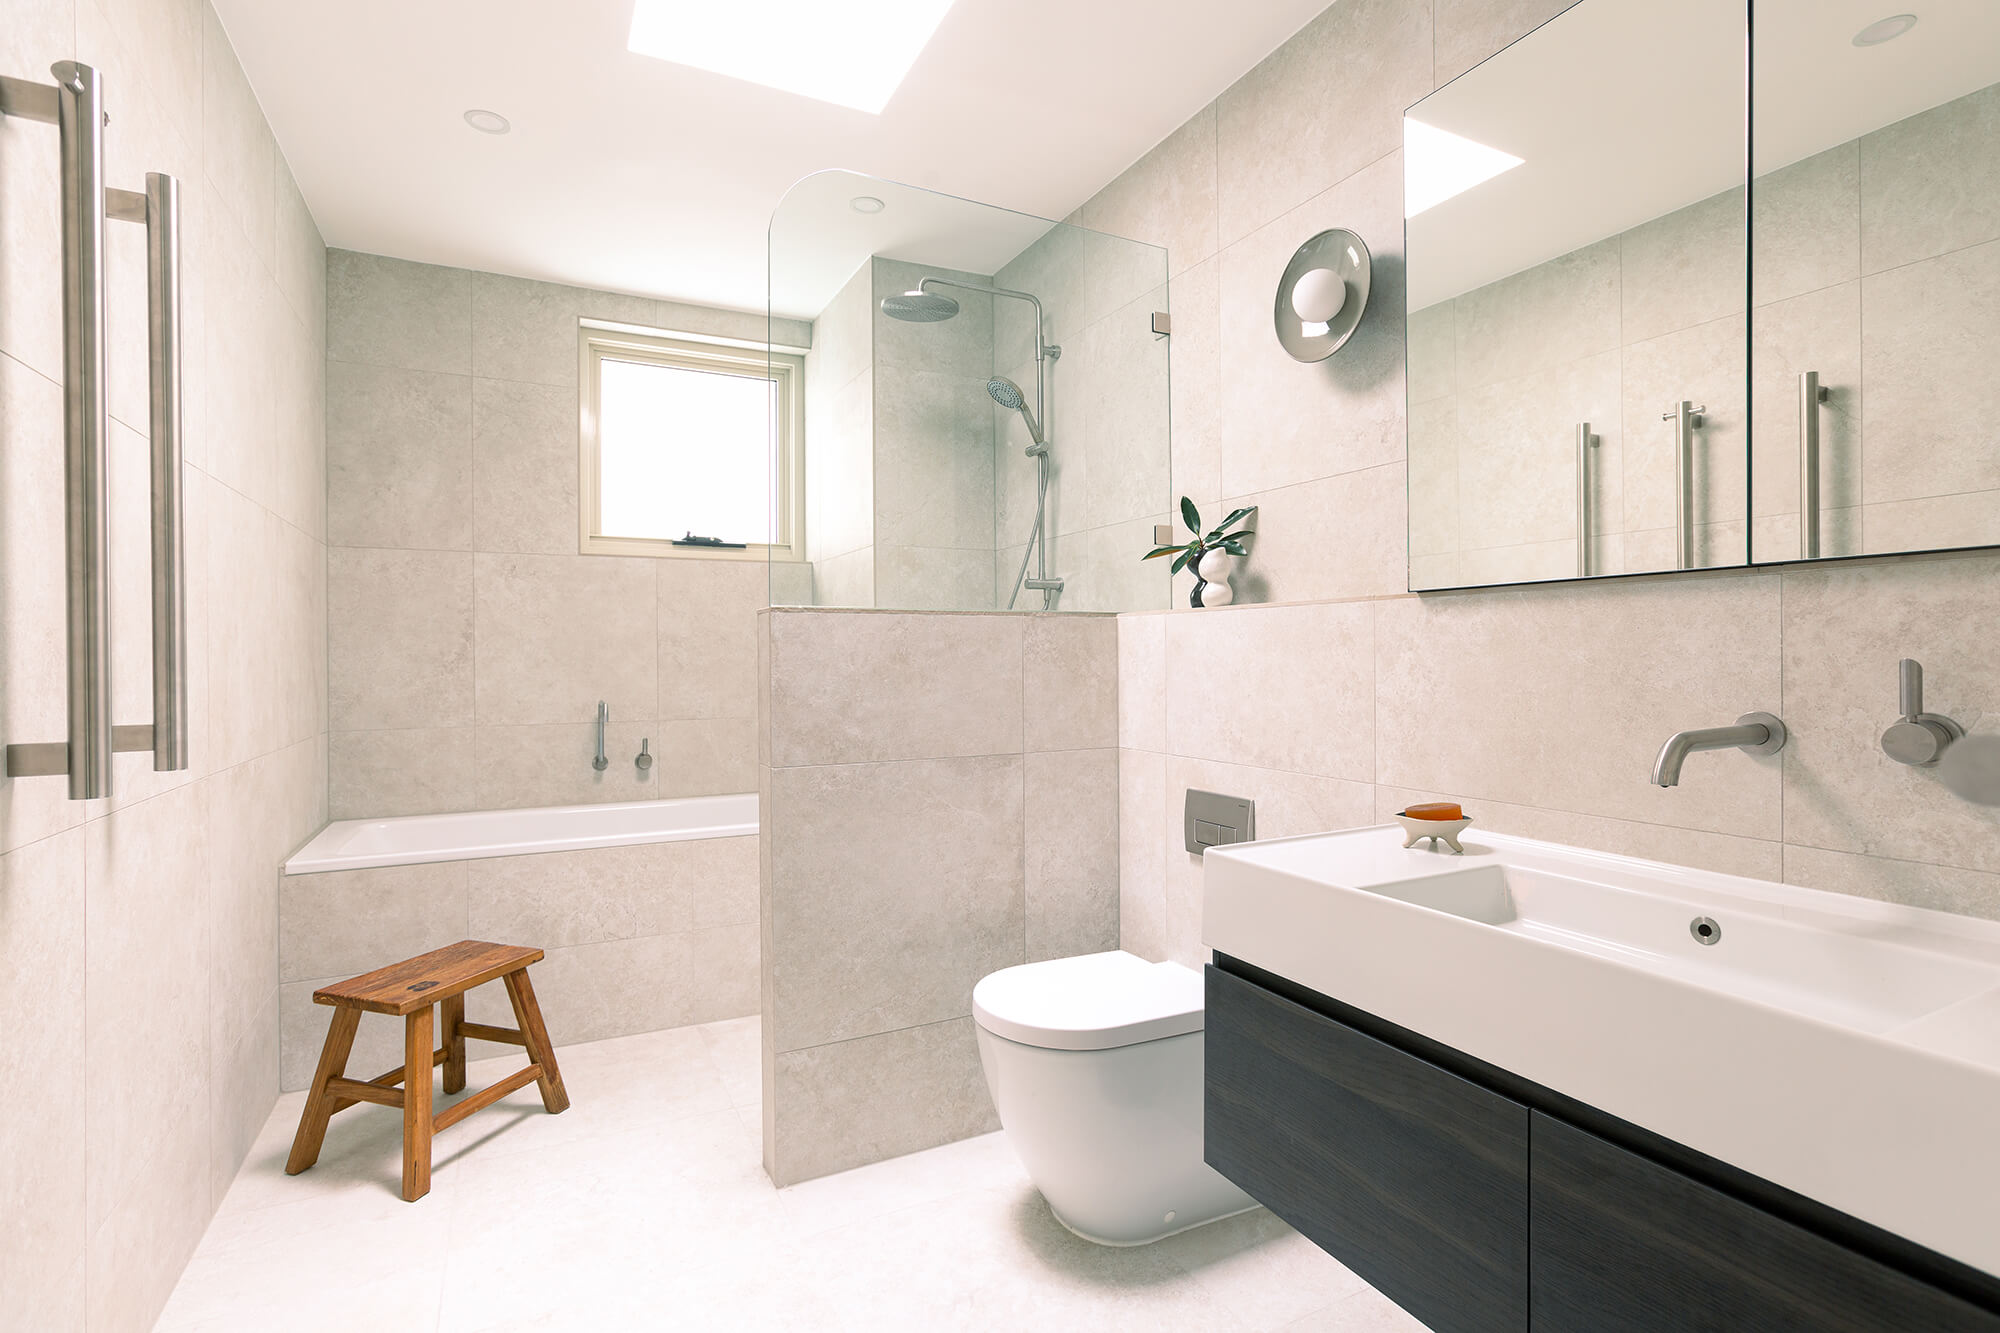 Tips for Choosing the Right Toilet and Bidet Options for Your Bathroom Design